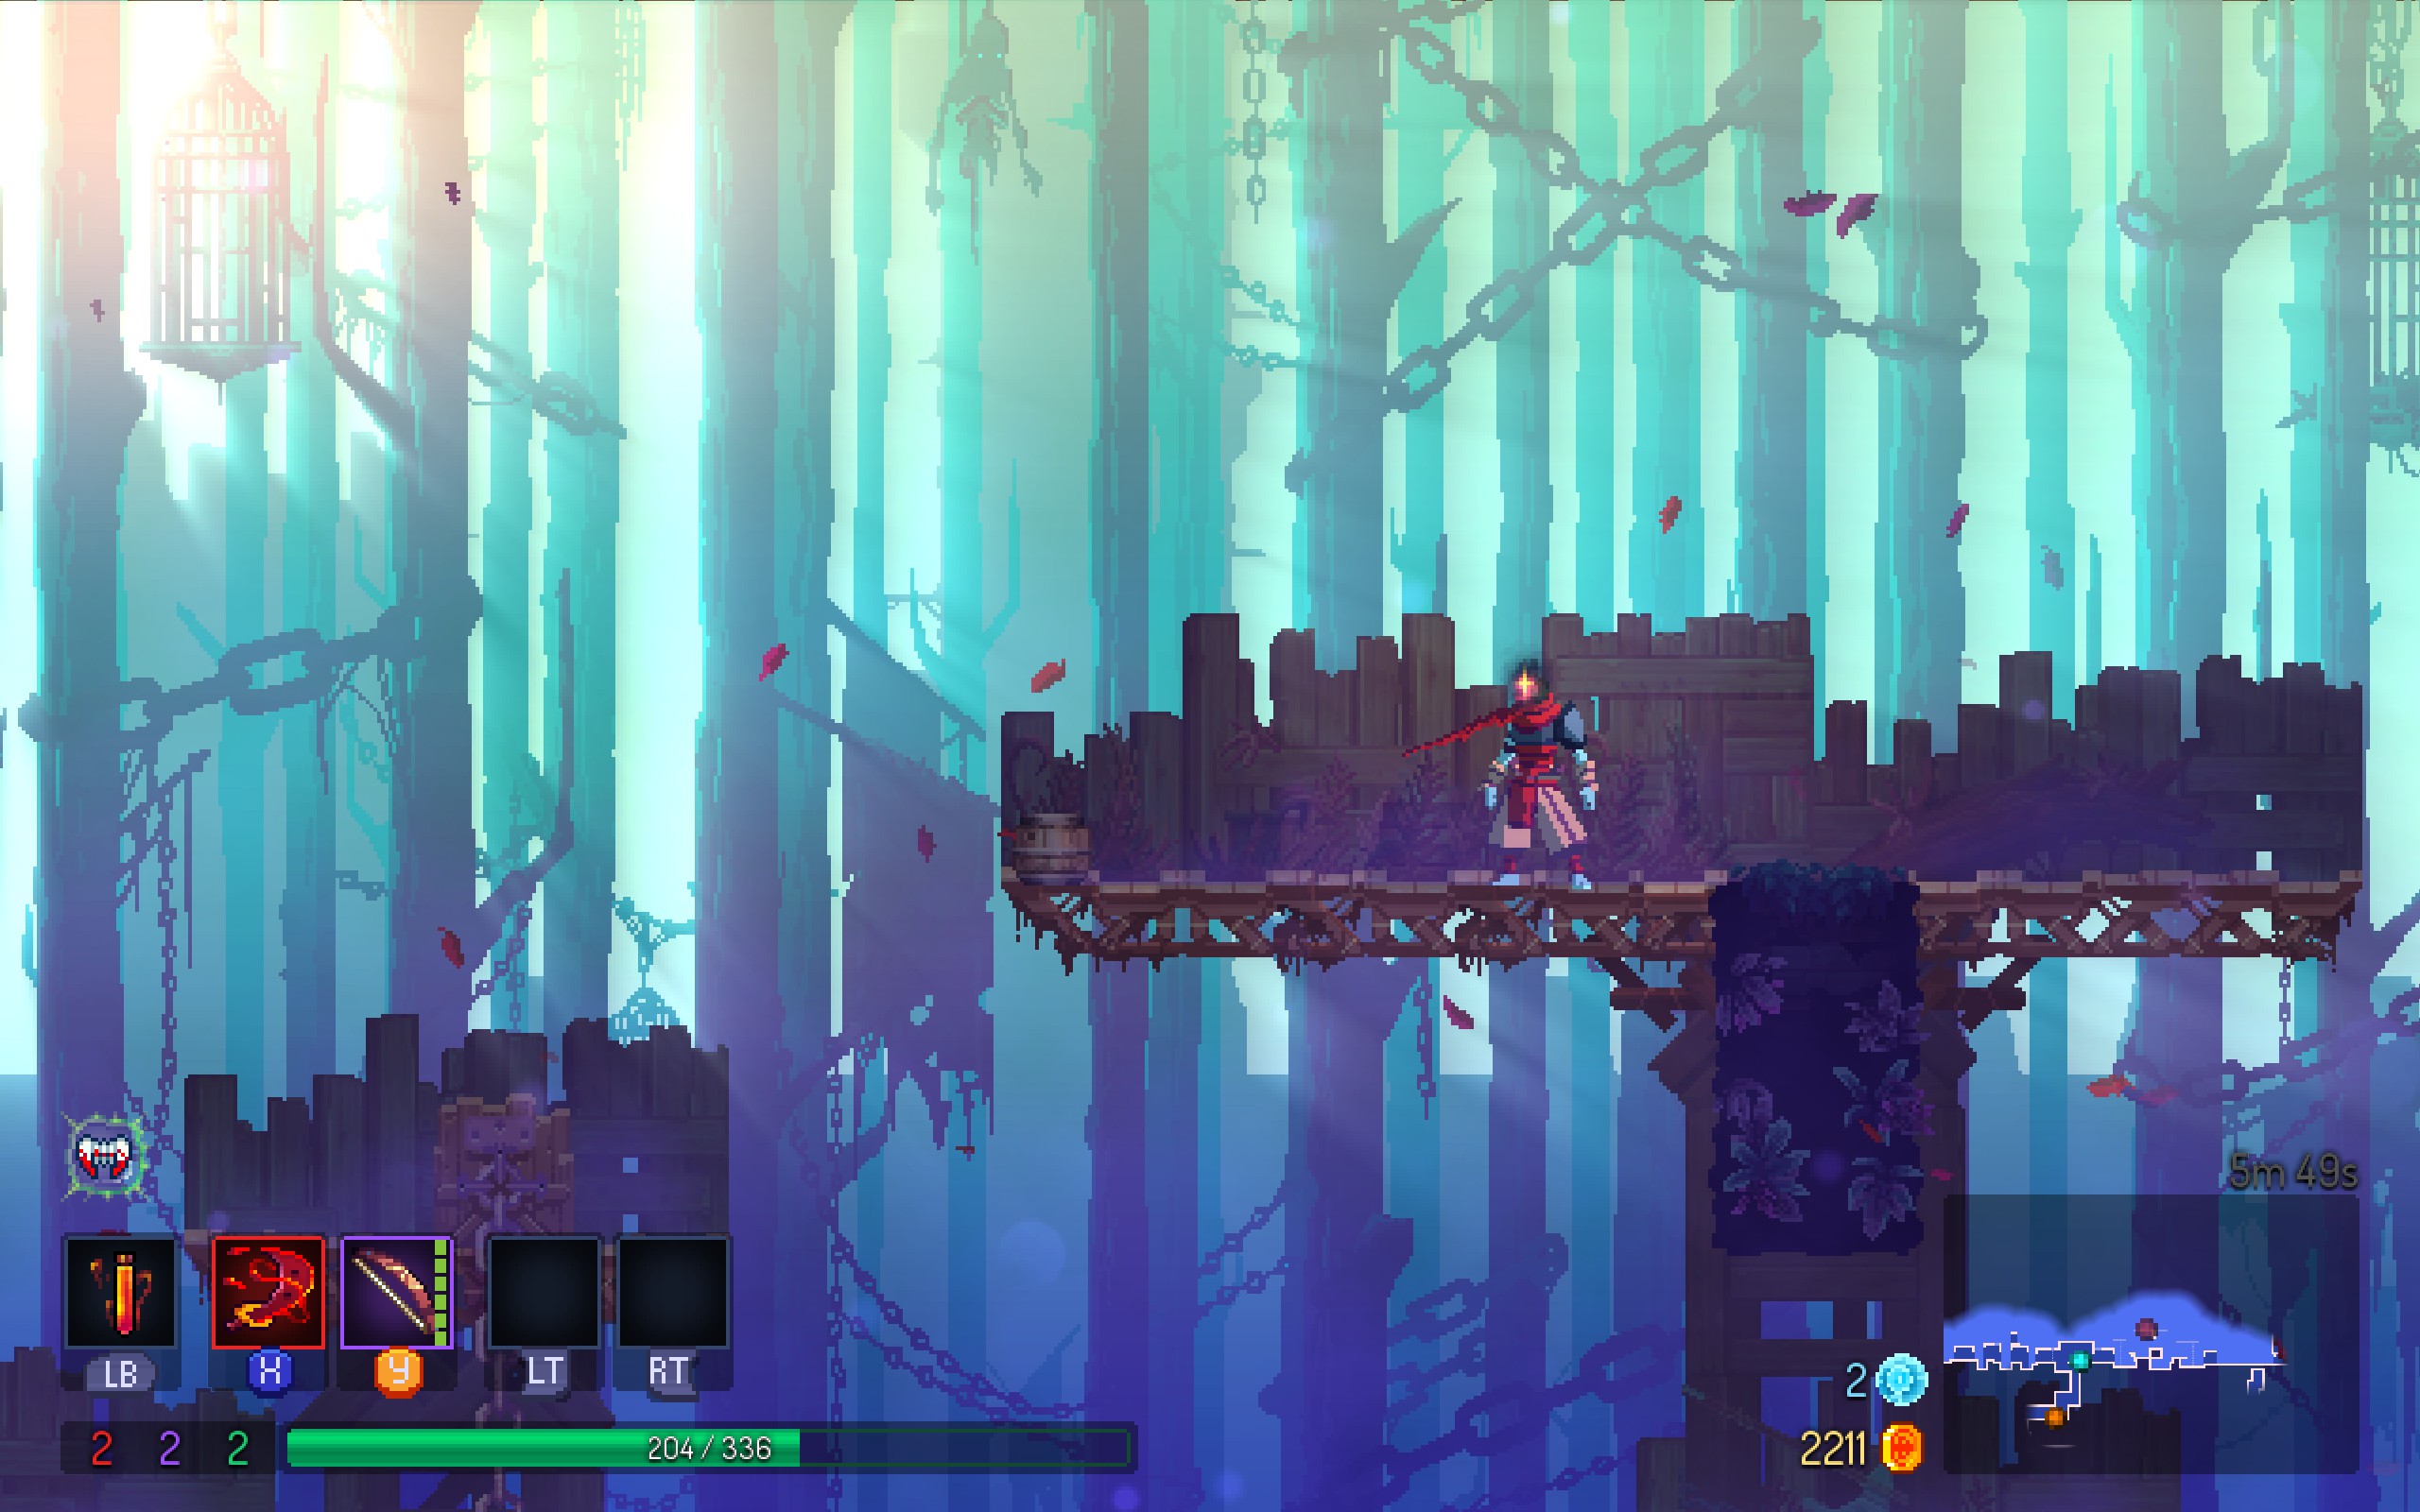 A gloomy forested area with morning sunlight streaming in, showcasing Dead Cells' art